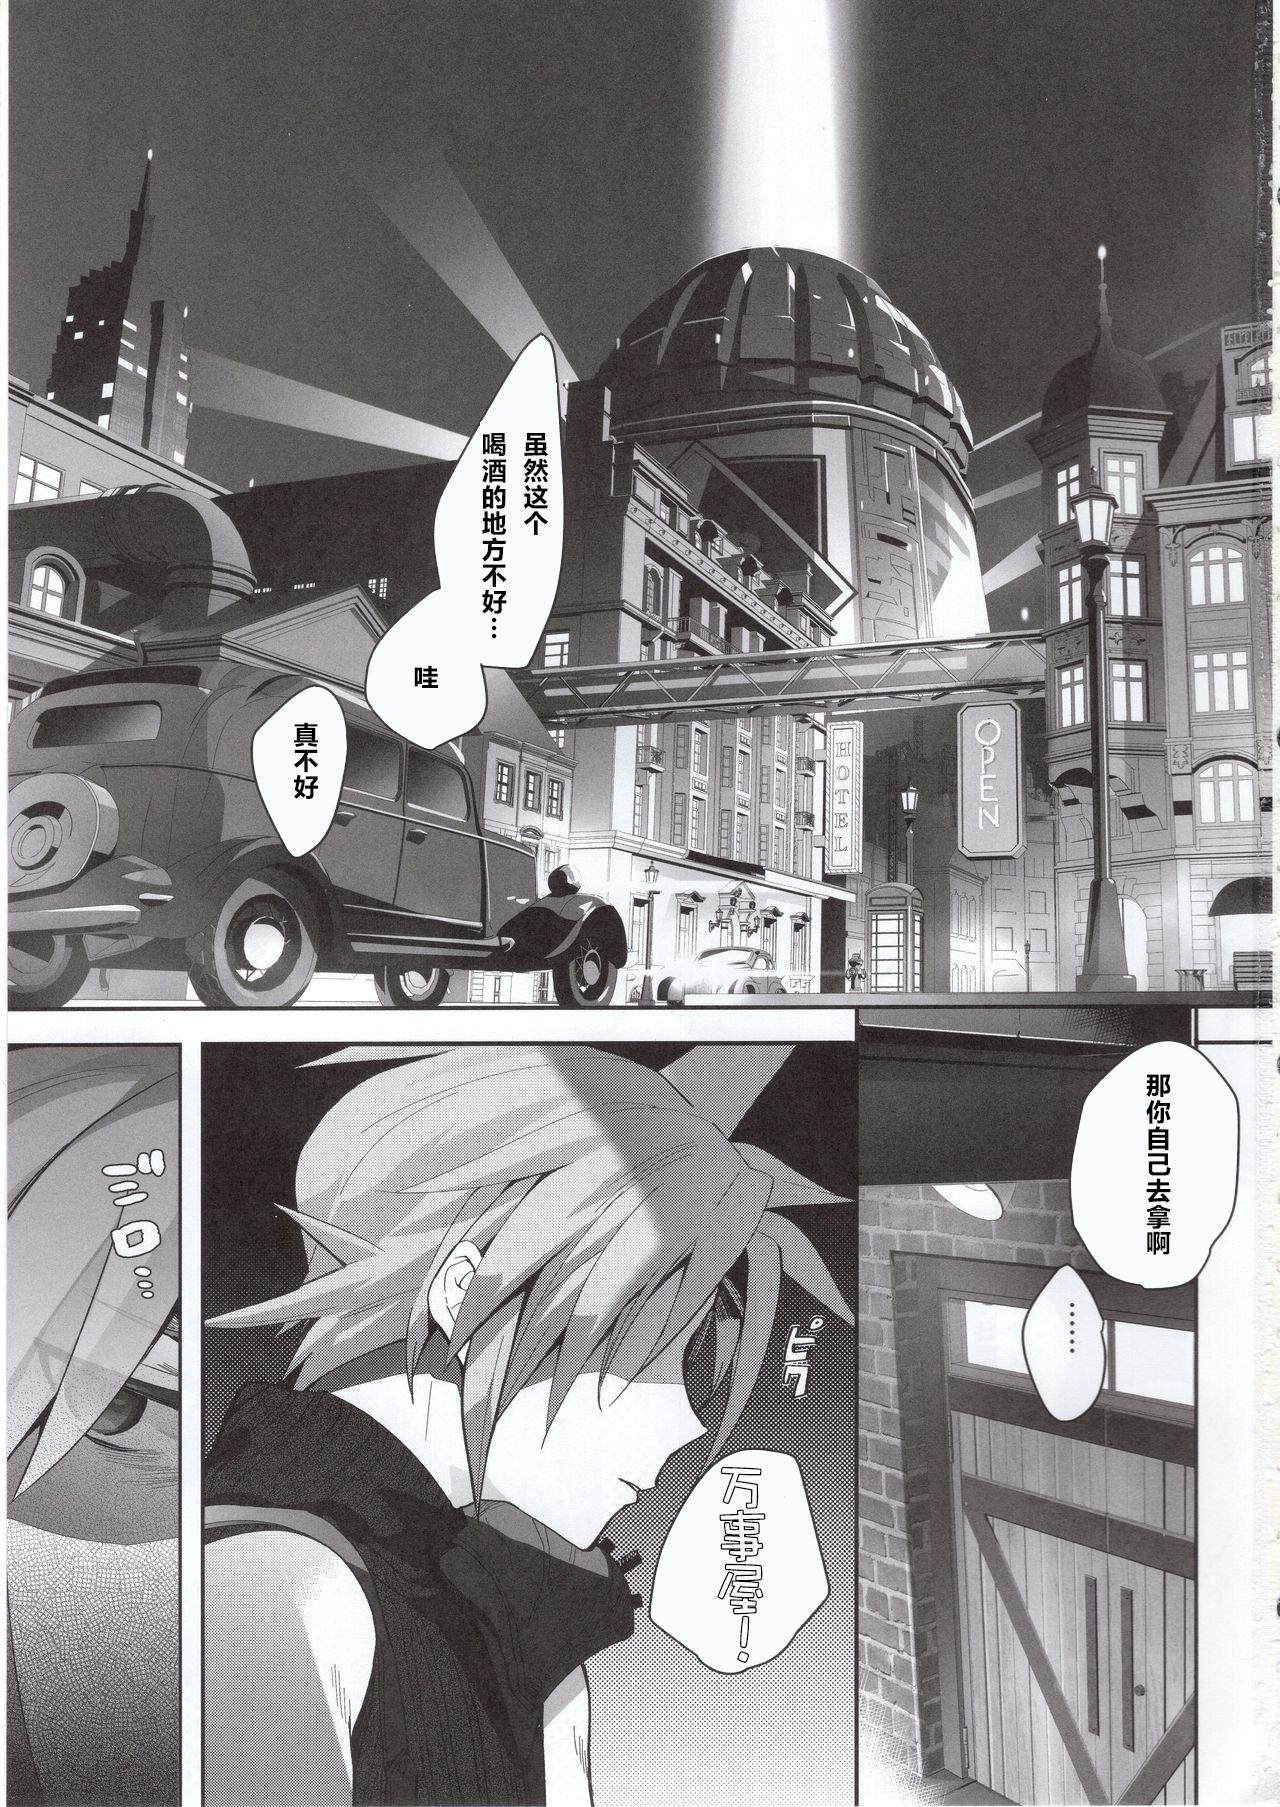 Goth Tantalizing Two Gill - Final fantasy vii Amateur - Page 2